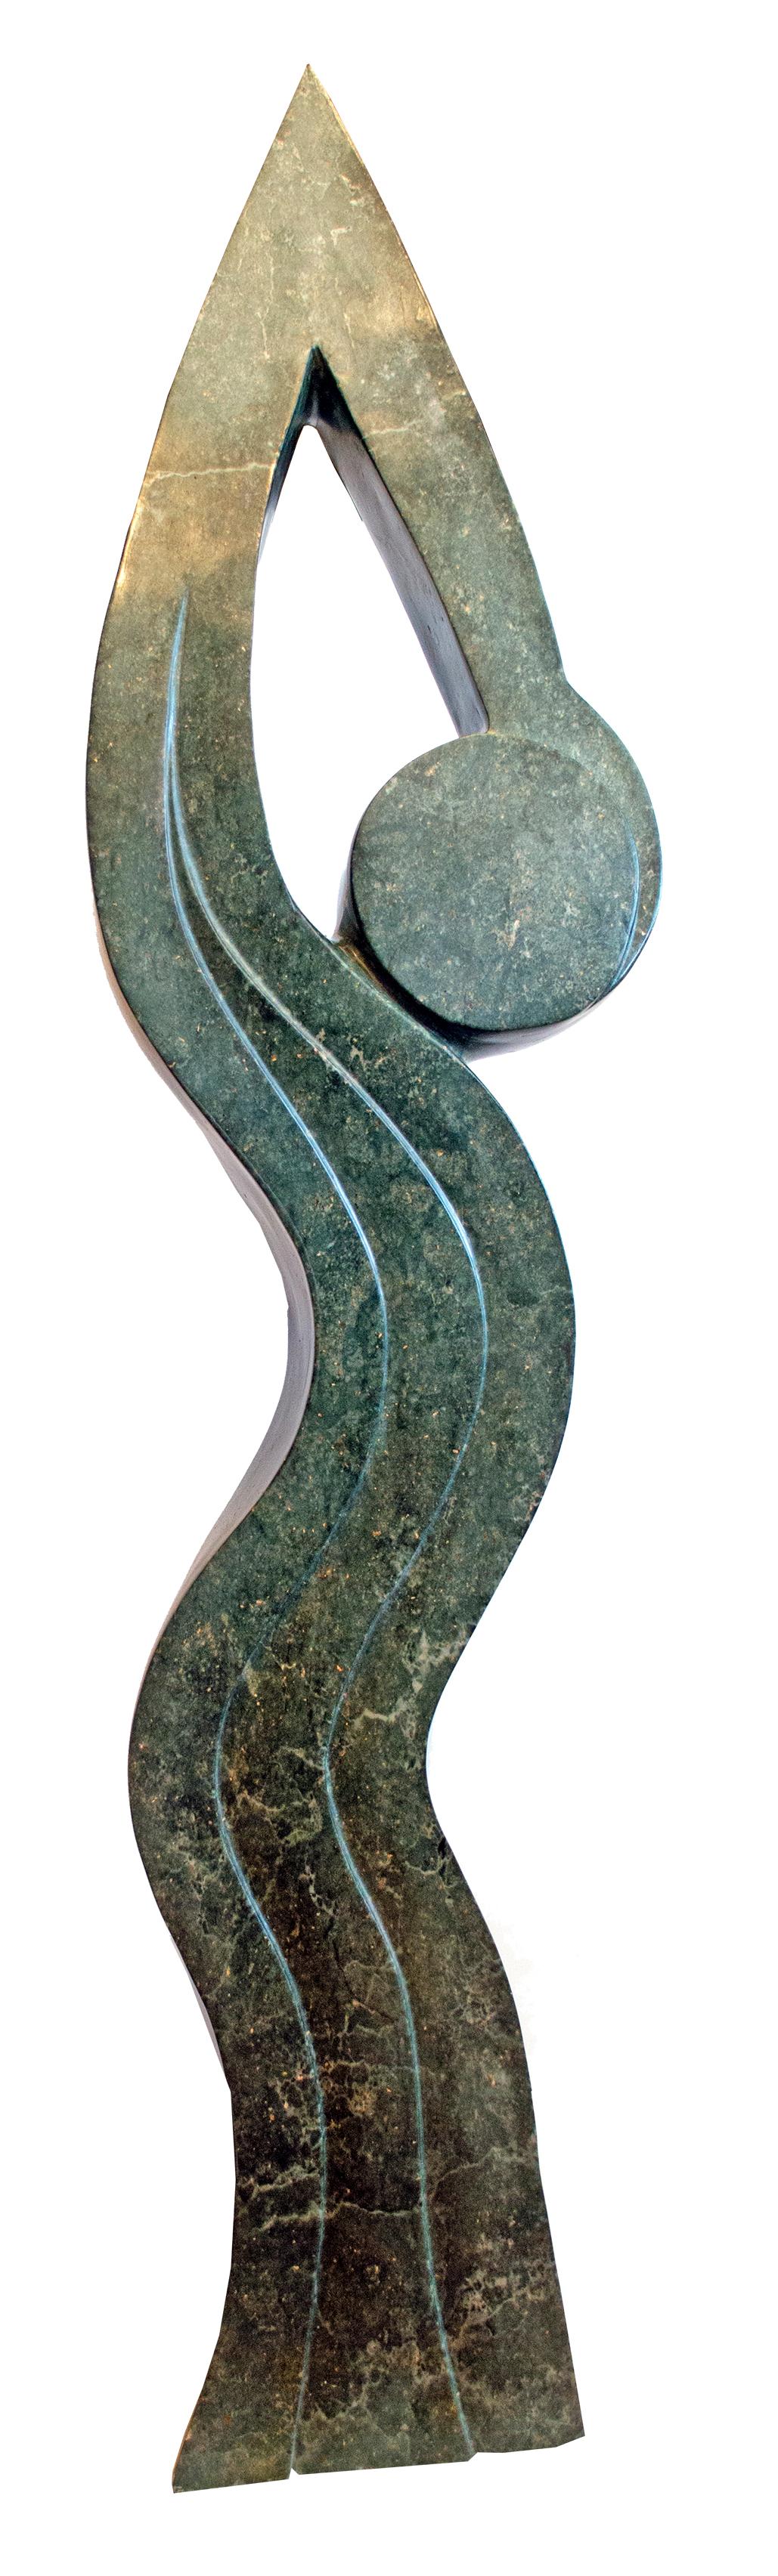 'Stretching' original opal serpentine Shona sculpture signed by Canaan Ngandu